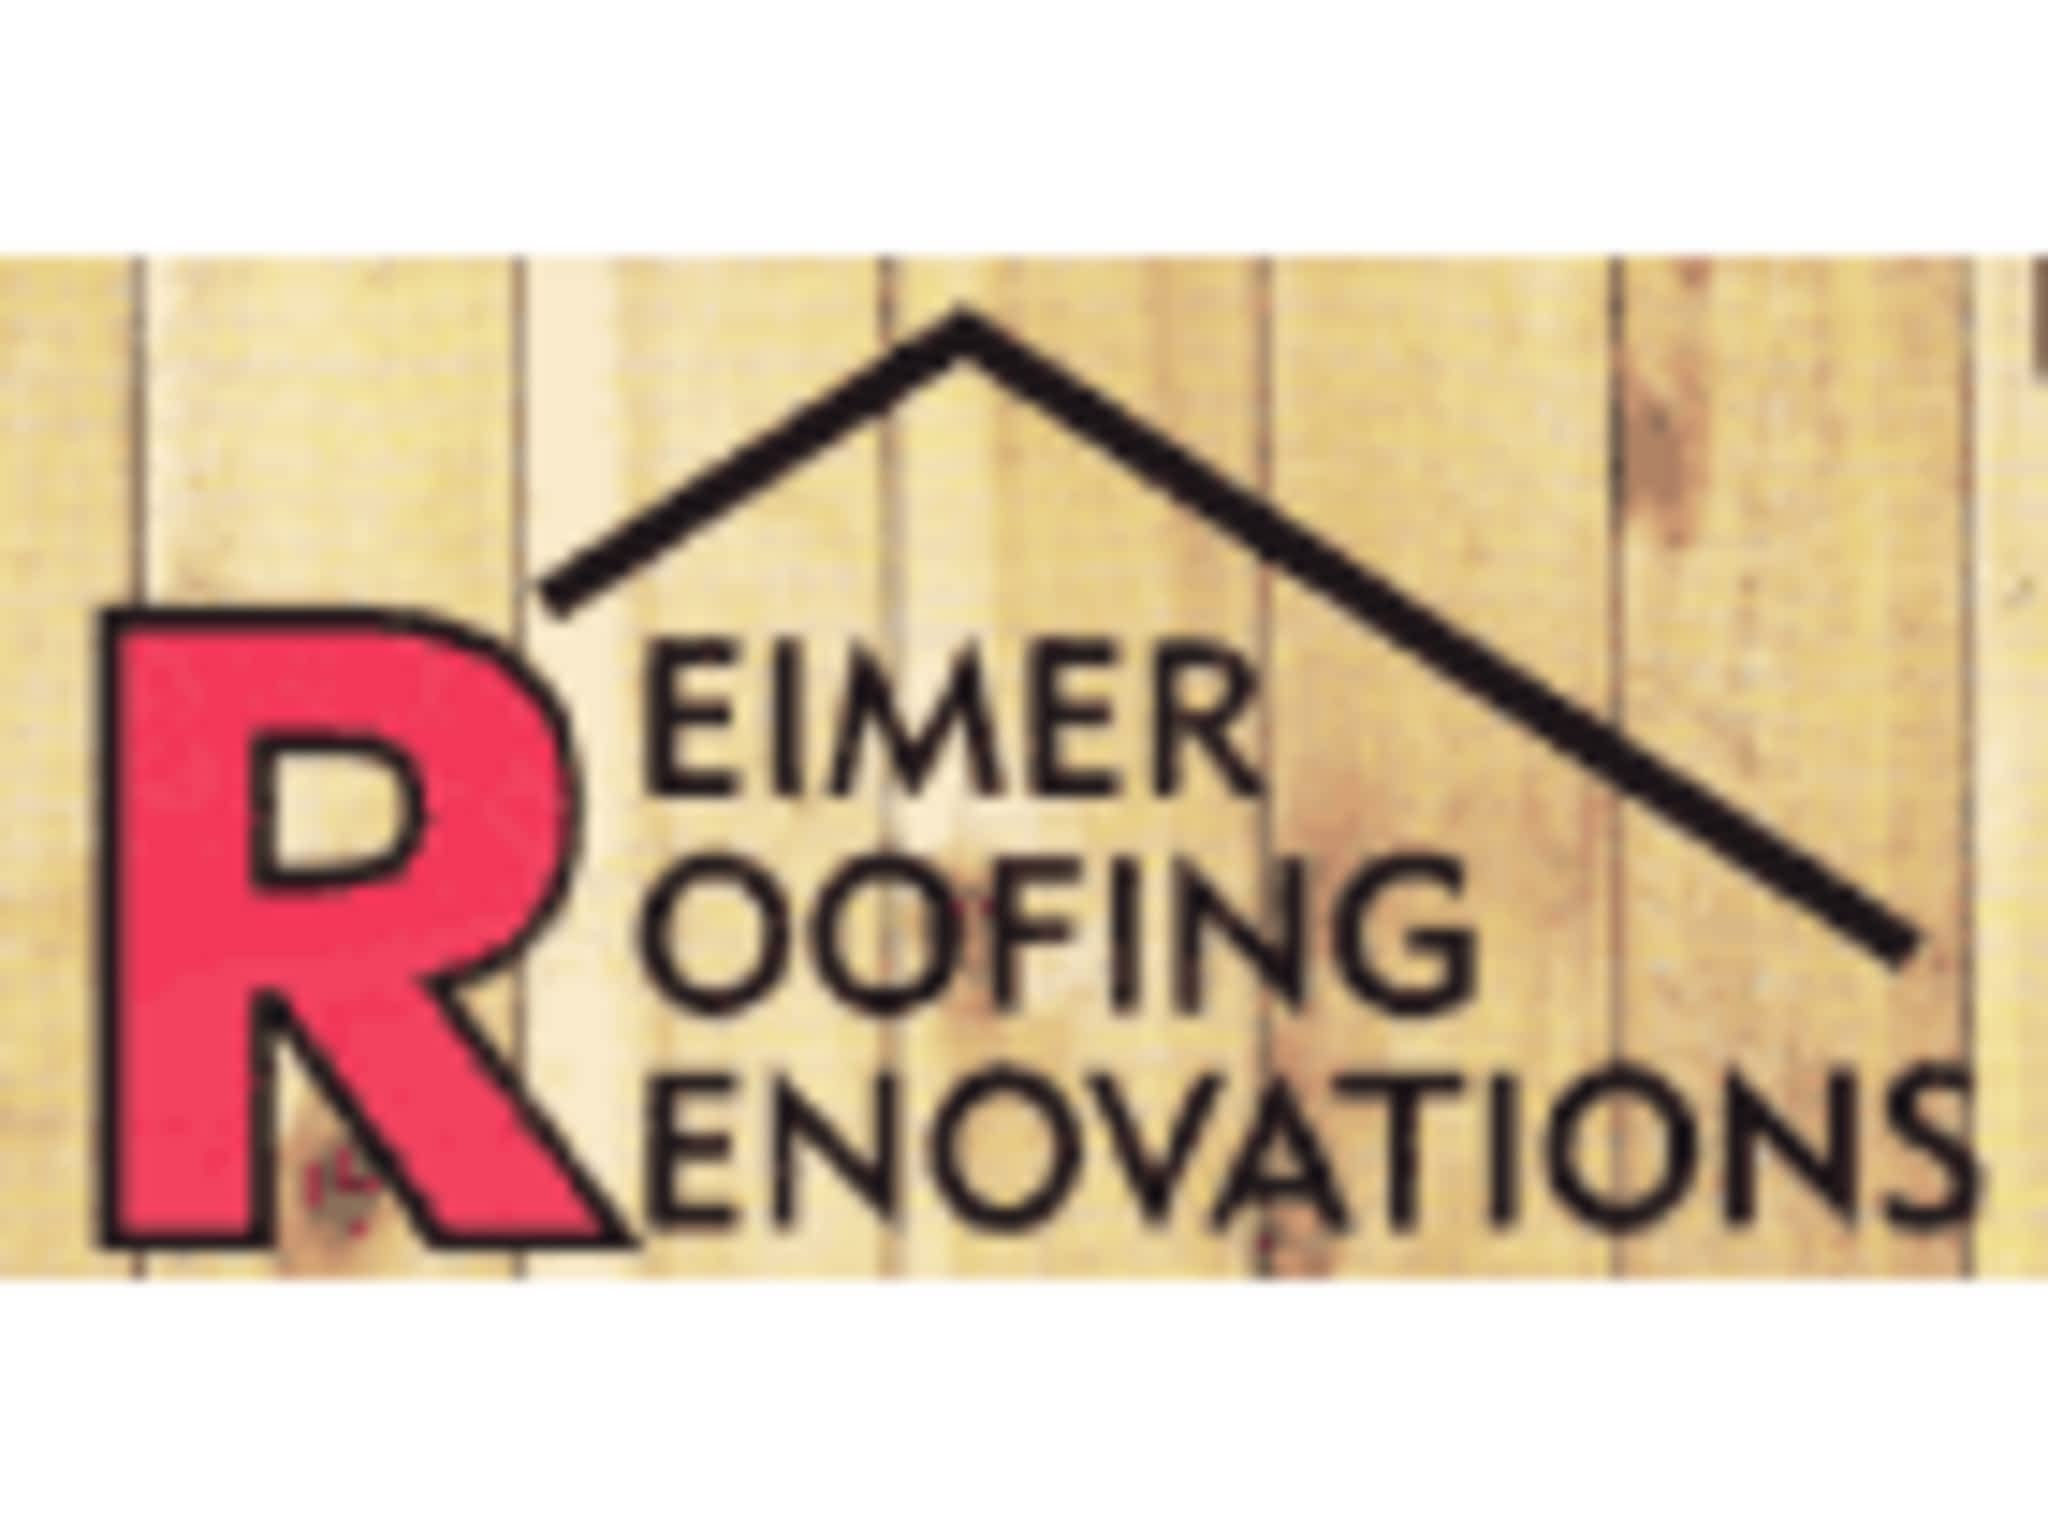 photo Reimer Roofing and Renovations